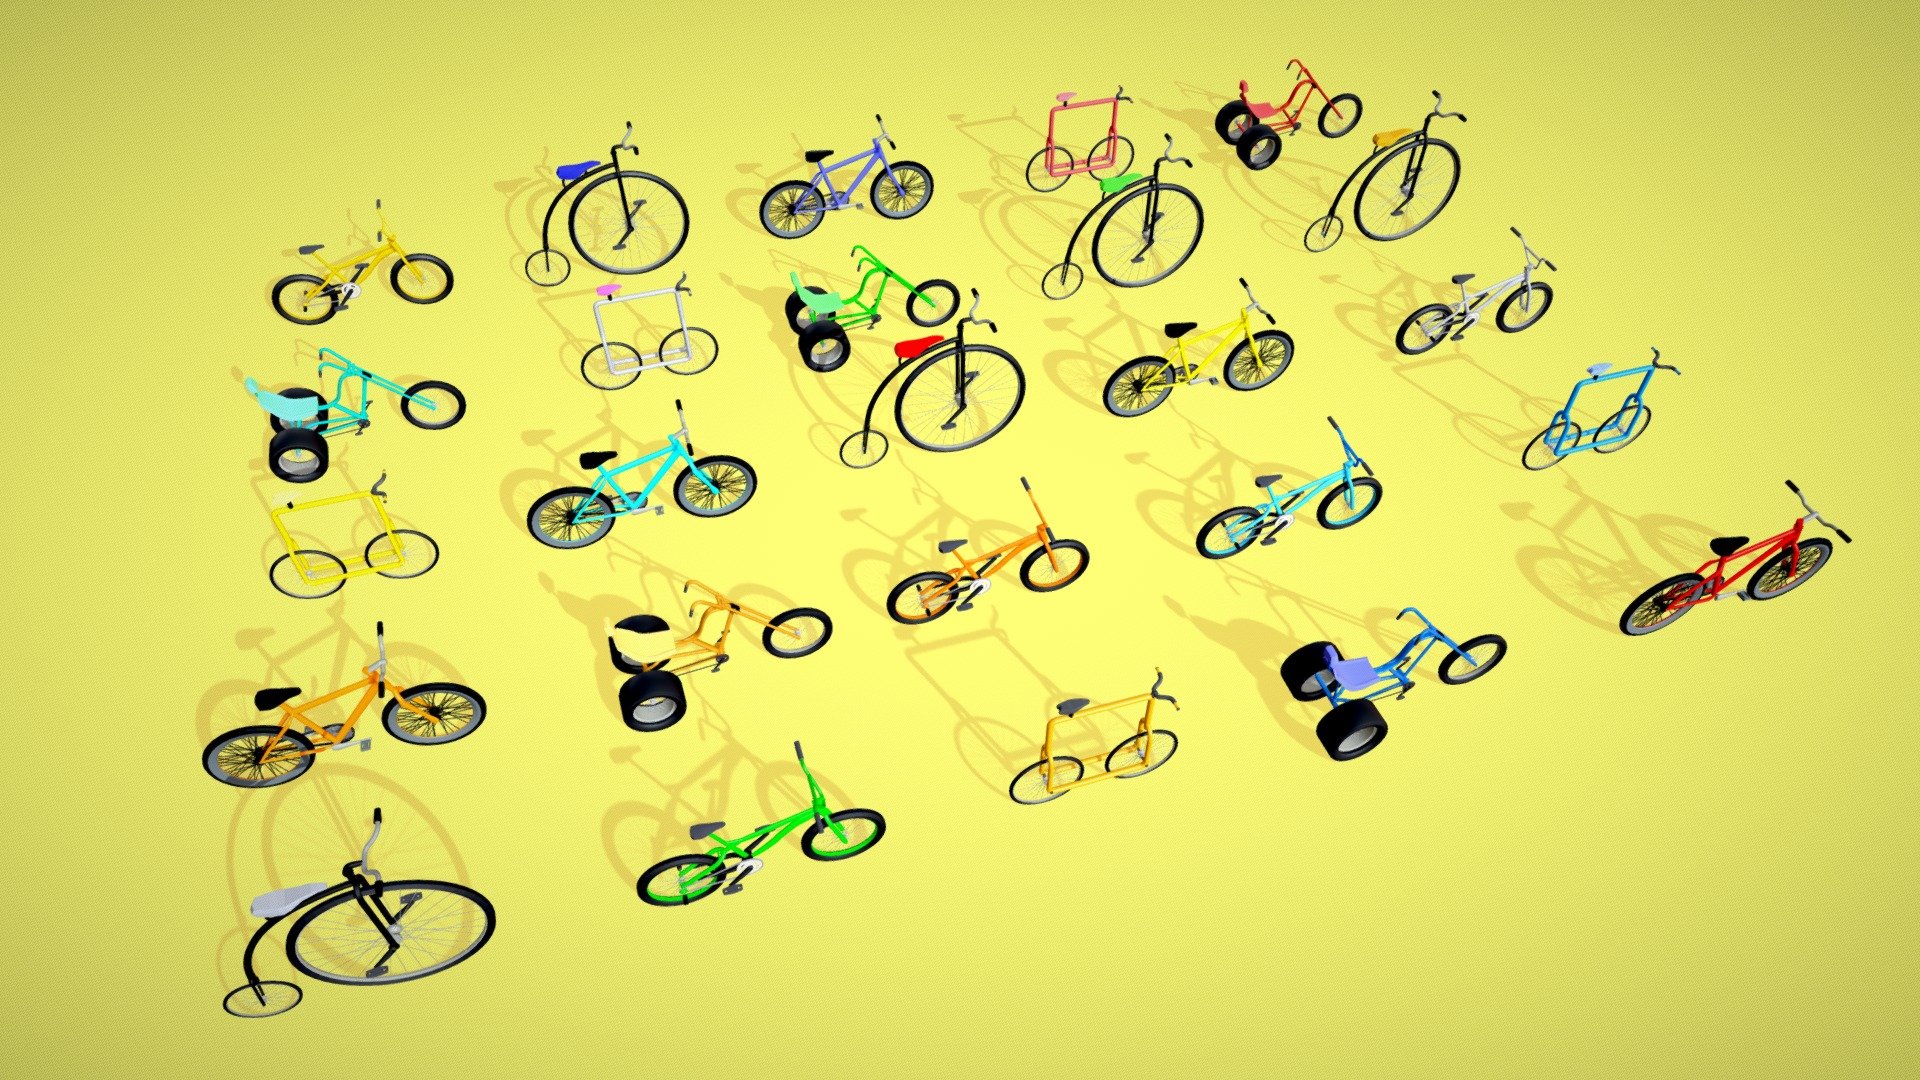 Created 25 very nice Bicycles in a single pack.
All the models are originally prepared in Blender.
Package includes the following file formats: Blend, Fbx, Obj, Glb

Enjoy this bicycle pack. If you like it then add comments below 3d model